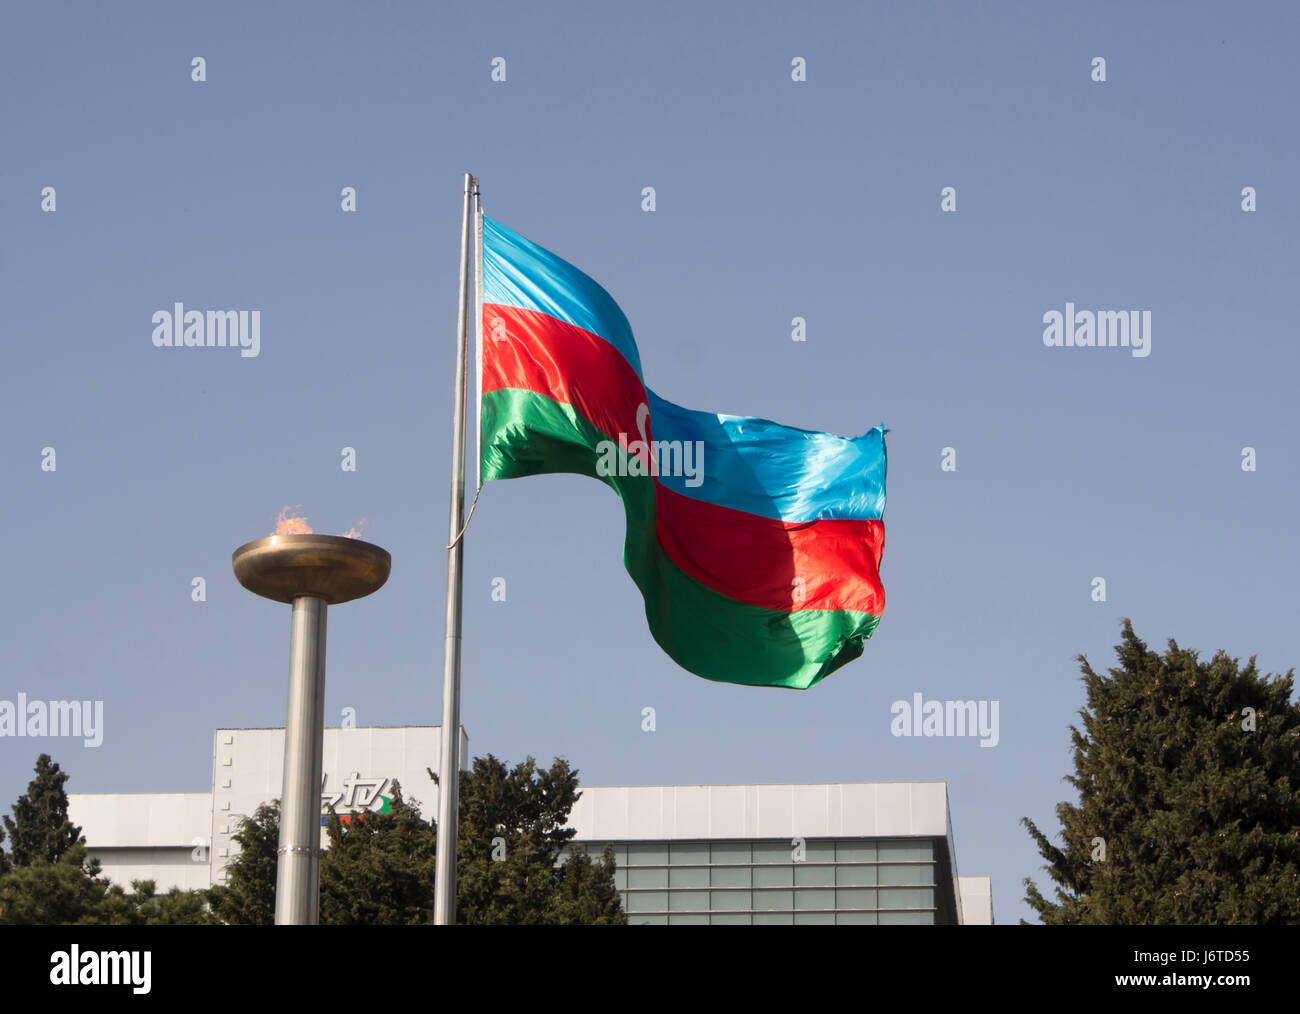 Azerbaijani flag and flame at the entrance to the Martyrs' Lane memorial and cemetery in The capital Baku Stock Photo